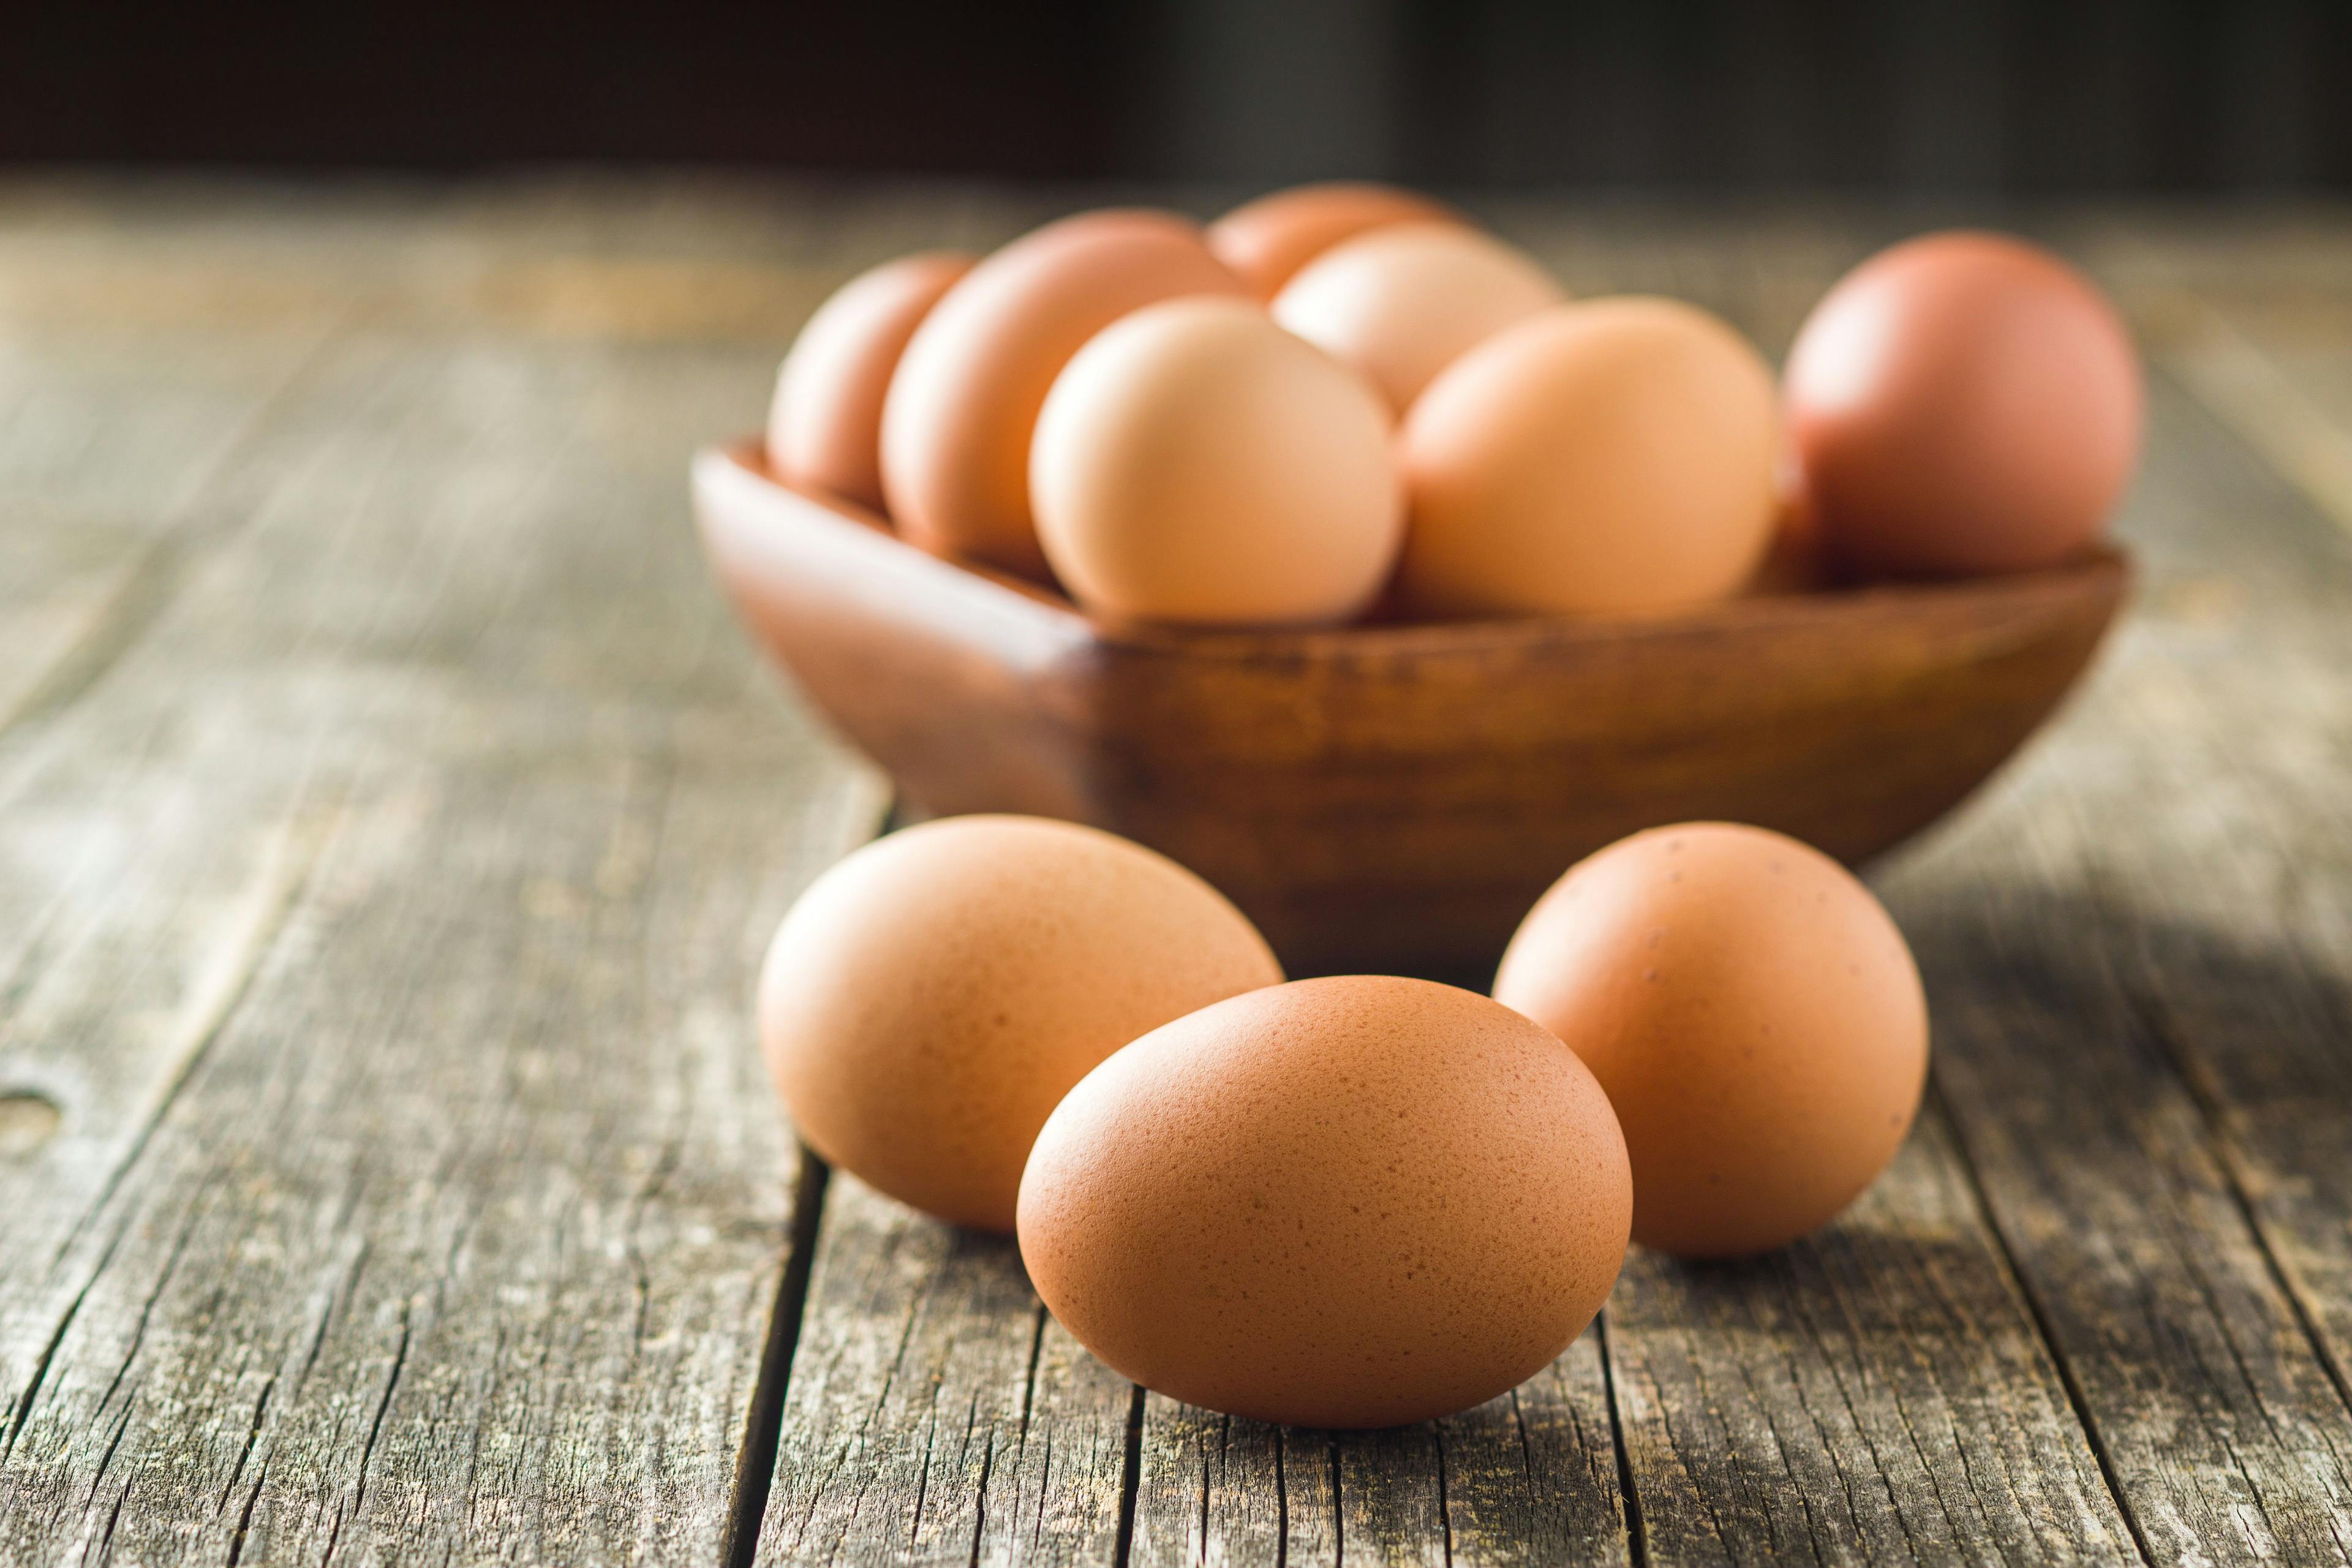 Determination of Fipronil and Its Metabolites in Eggs and Environmental Matrices by LC–MS/MS